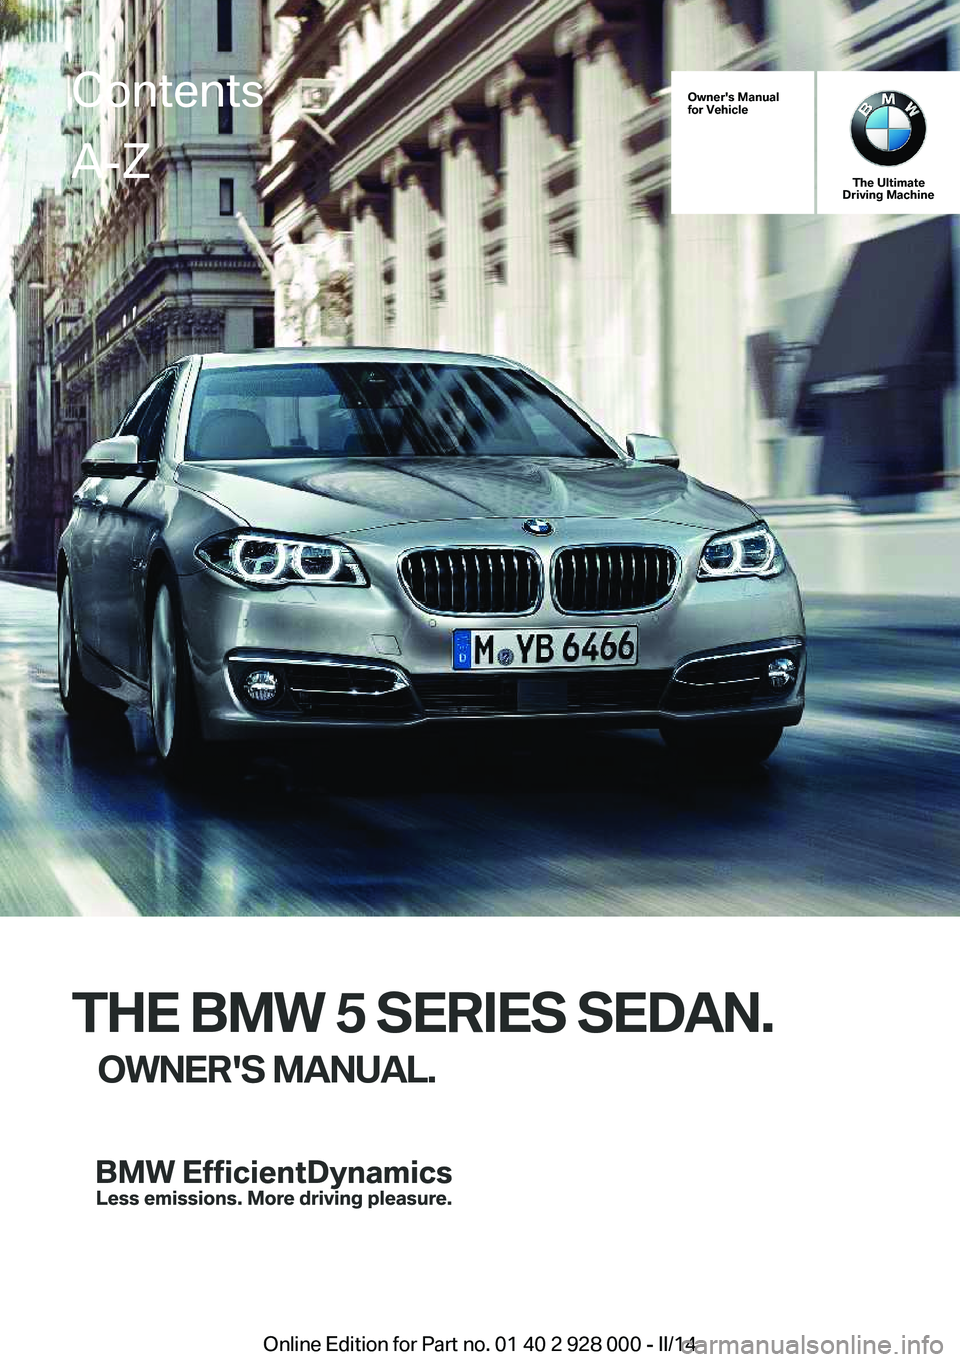 BMW 550I SEDAN 2014  Owners Manual Owner's Manual
for Vehicle
The Ultimate
Driving Machine
THE BMW 5 SERIES SEDAN.
OWNER'S MANUAL.
ContentsA-Z
Online Edition for Part no. 01 40 2 928 000 - II/14   